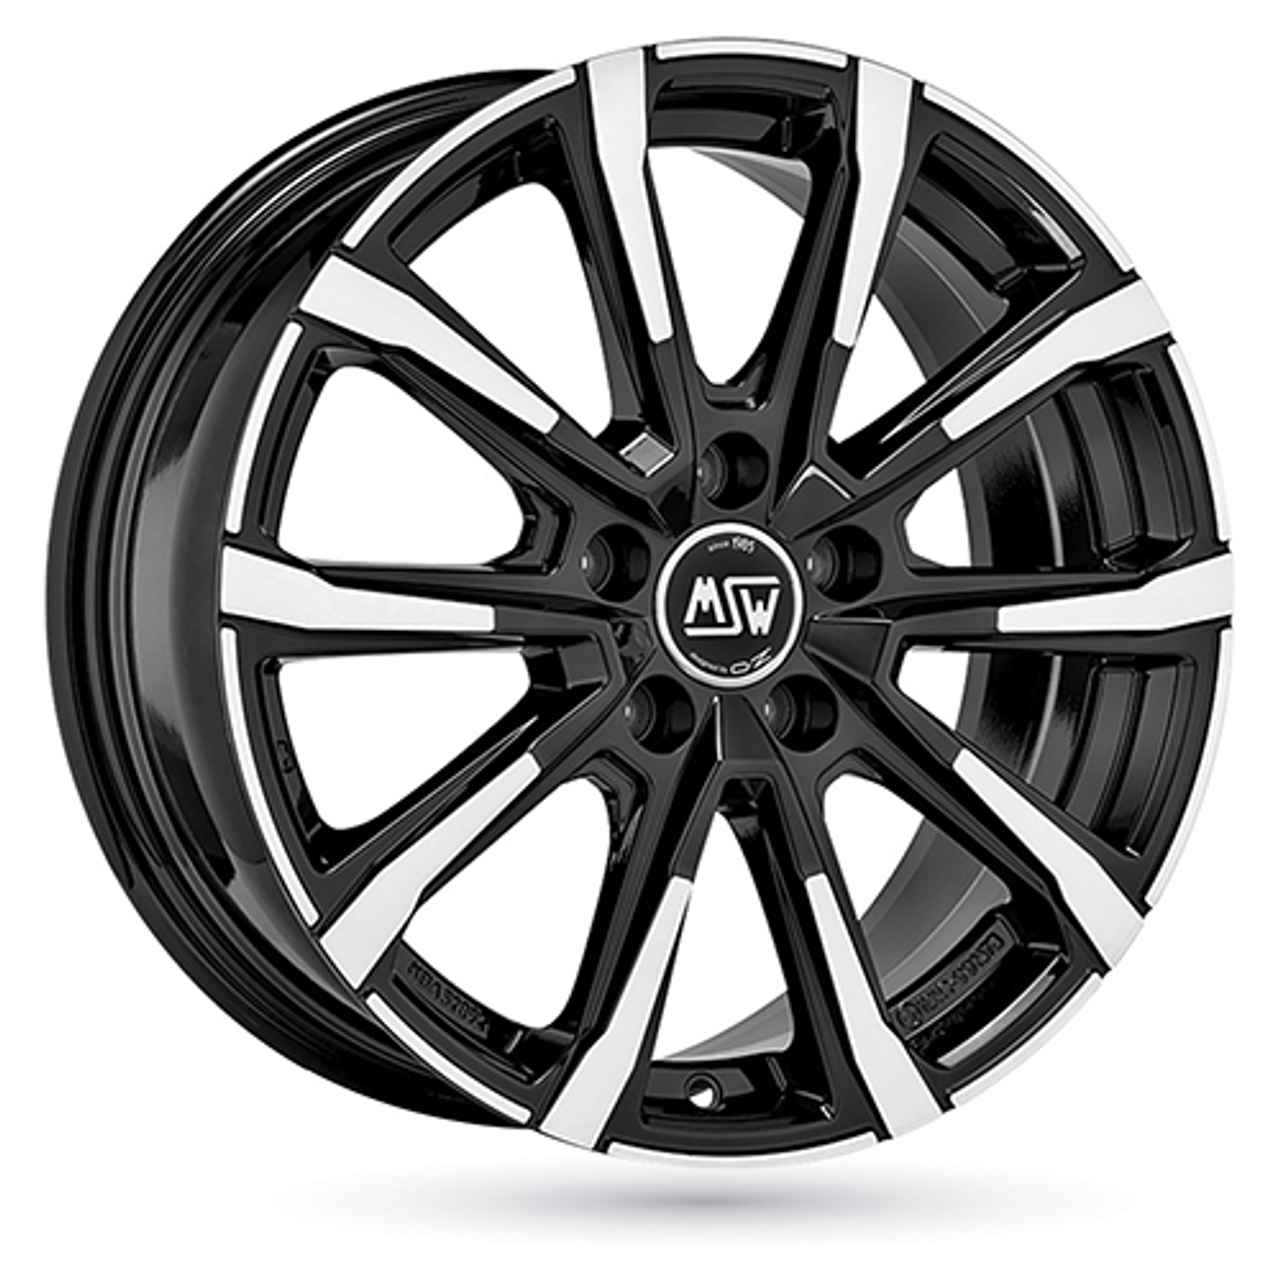 MSW (OZ) MSW 79 gloss black full polished 7.5Jx18 5x112 ET51